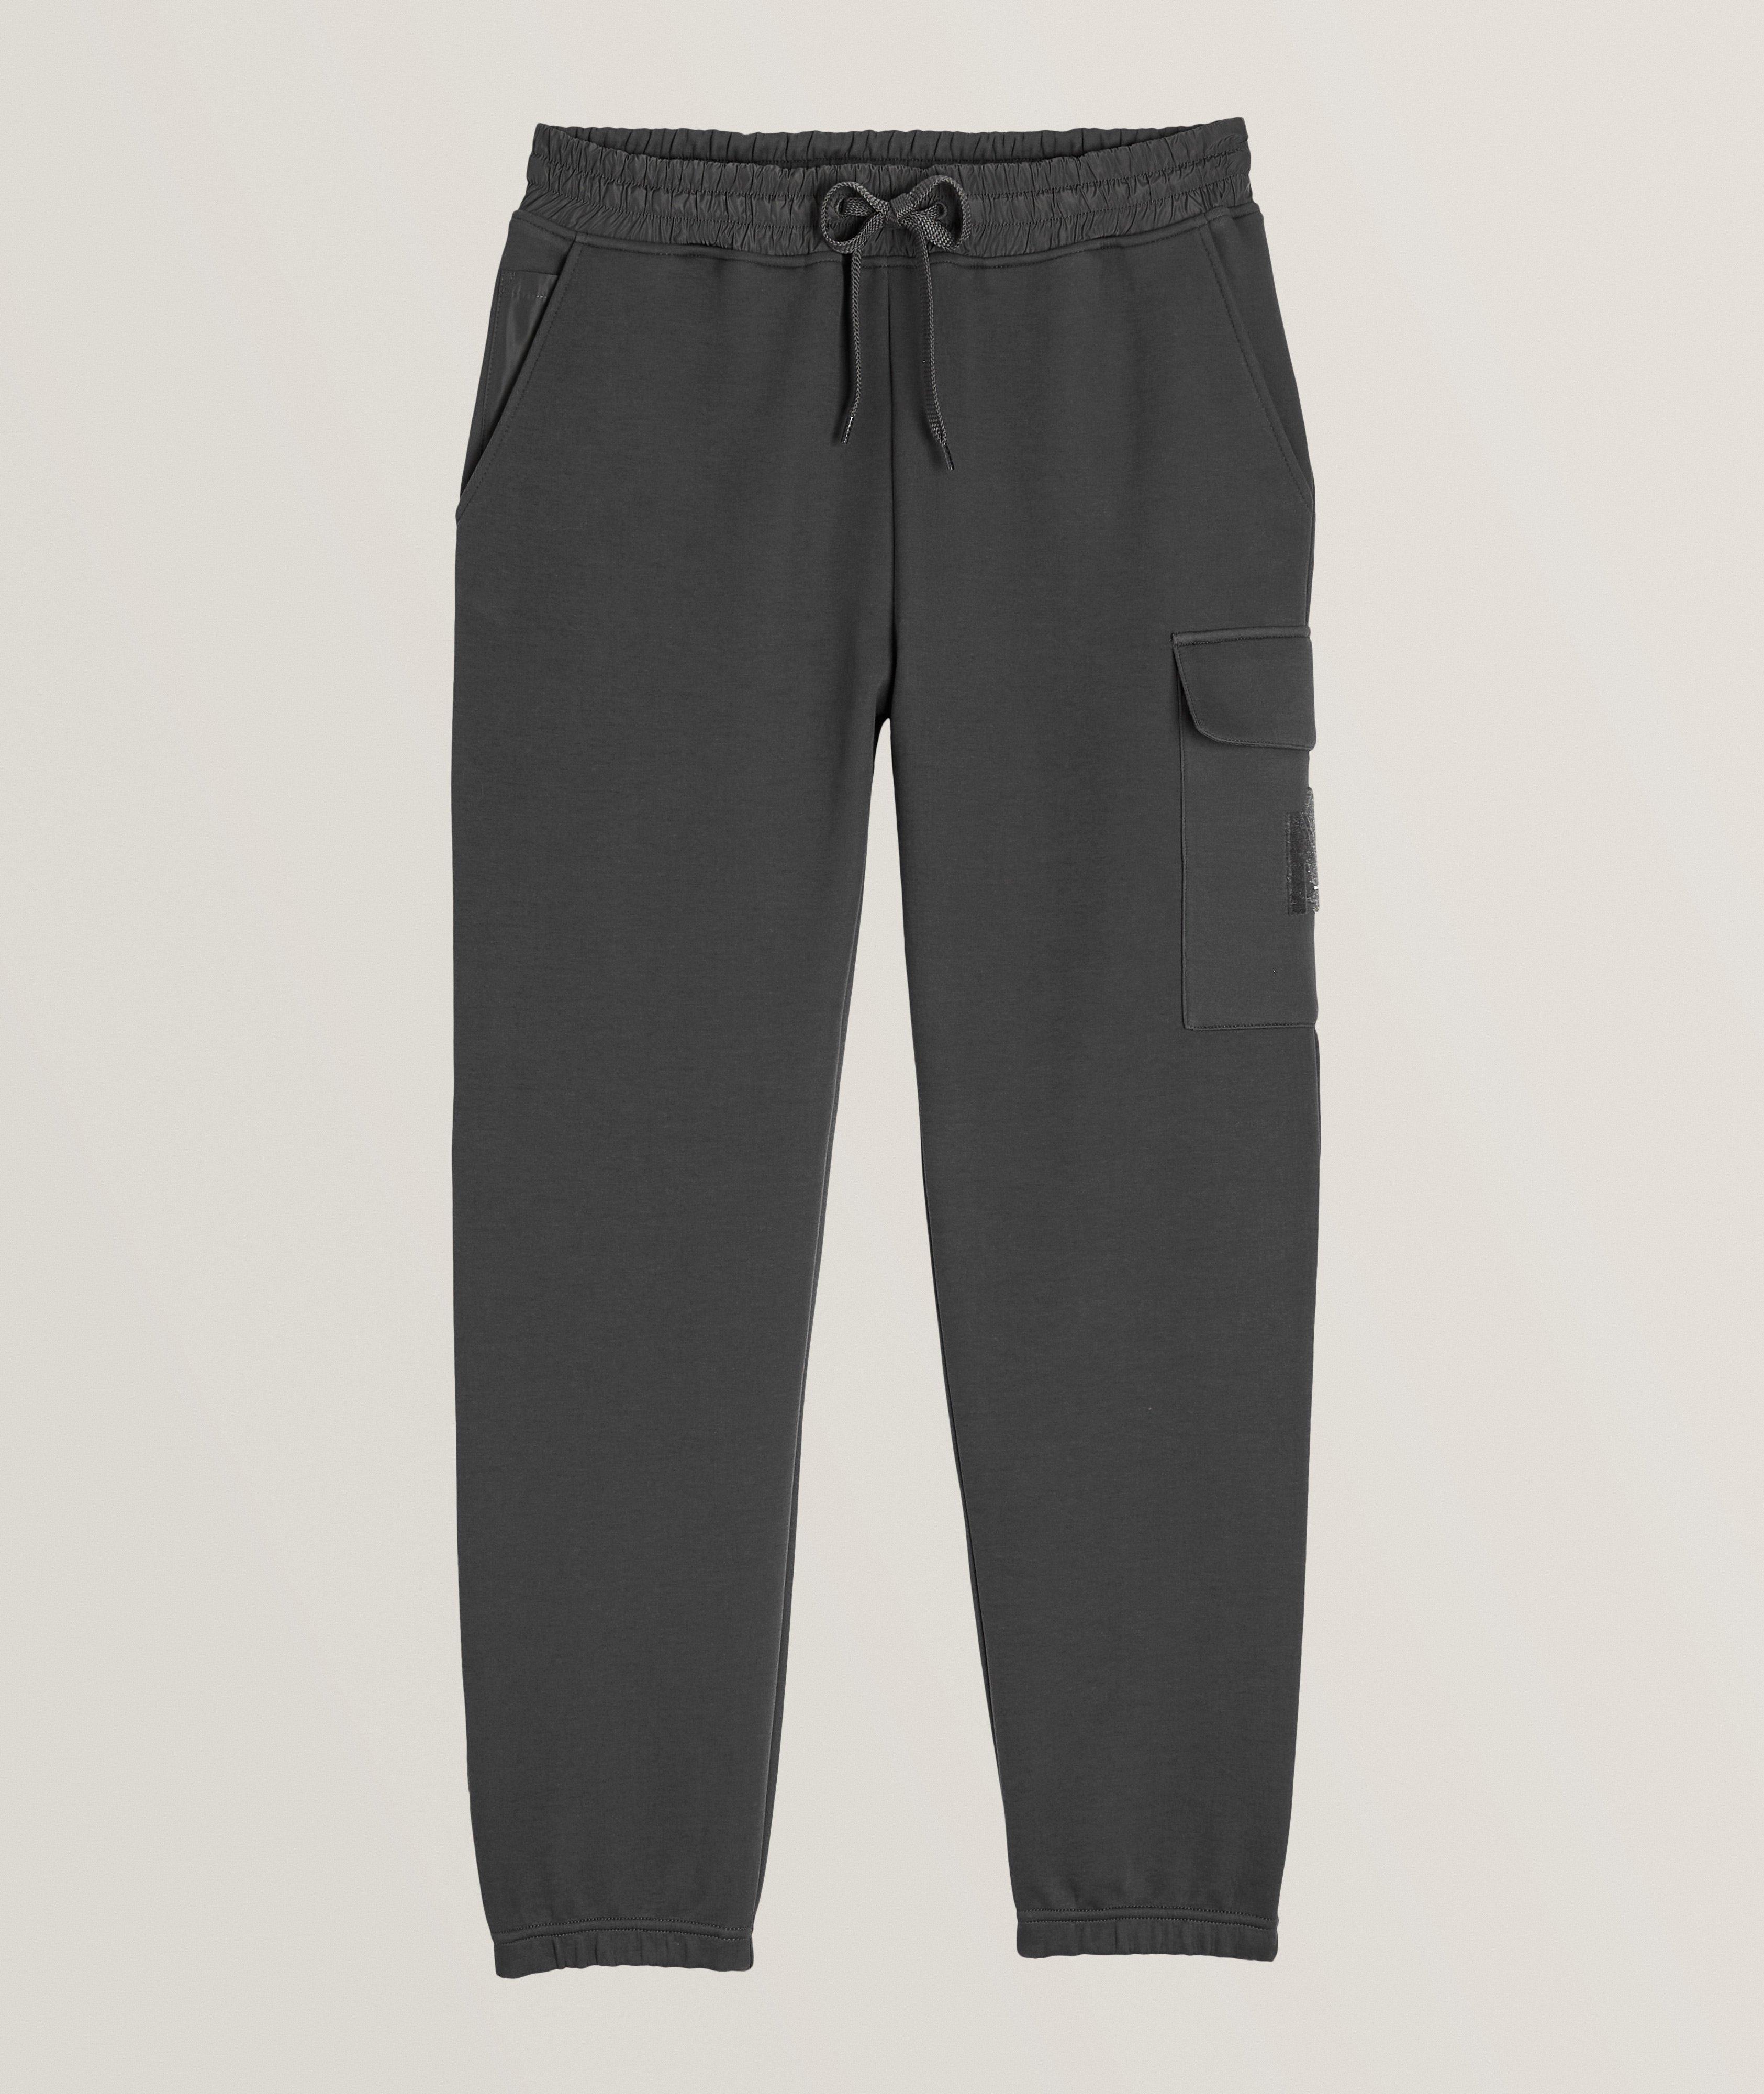 Marvin Jersey Cotton Track Pants image 0